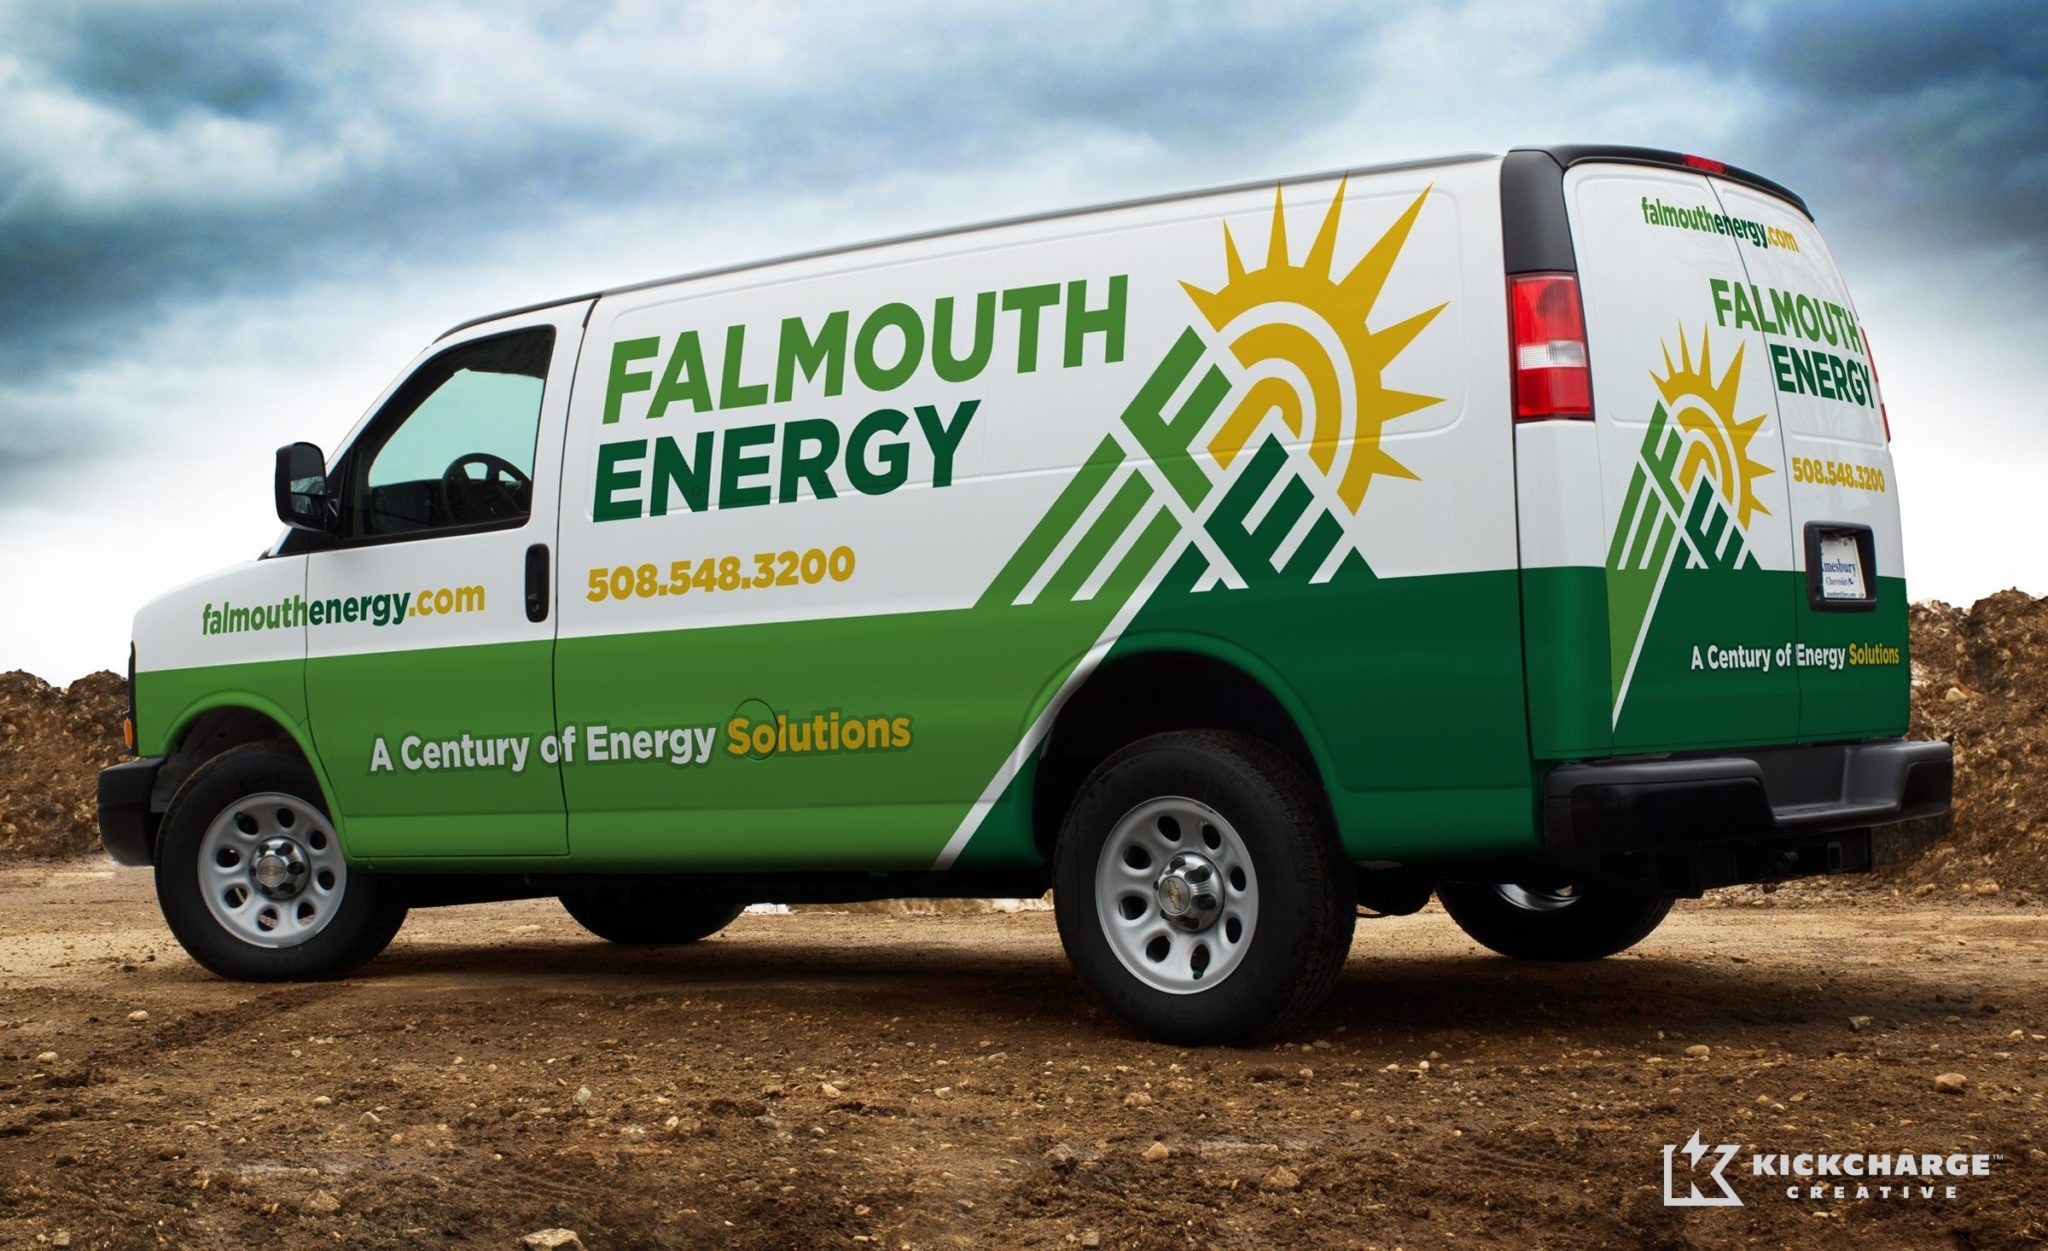 Truck wrap design and branding for an energy solution company located in Falmouth, MA.